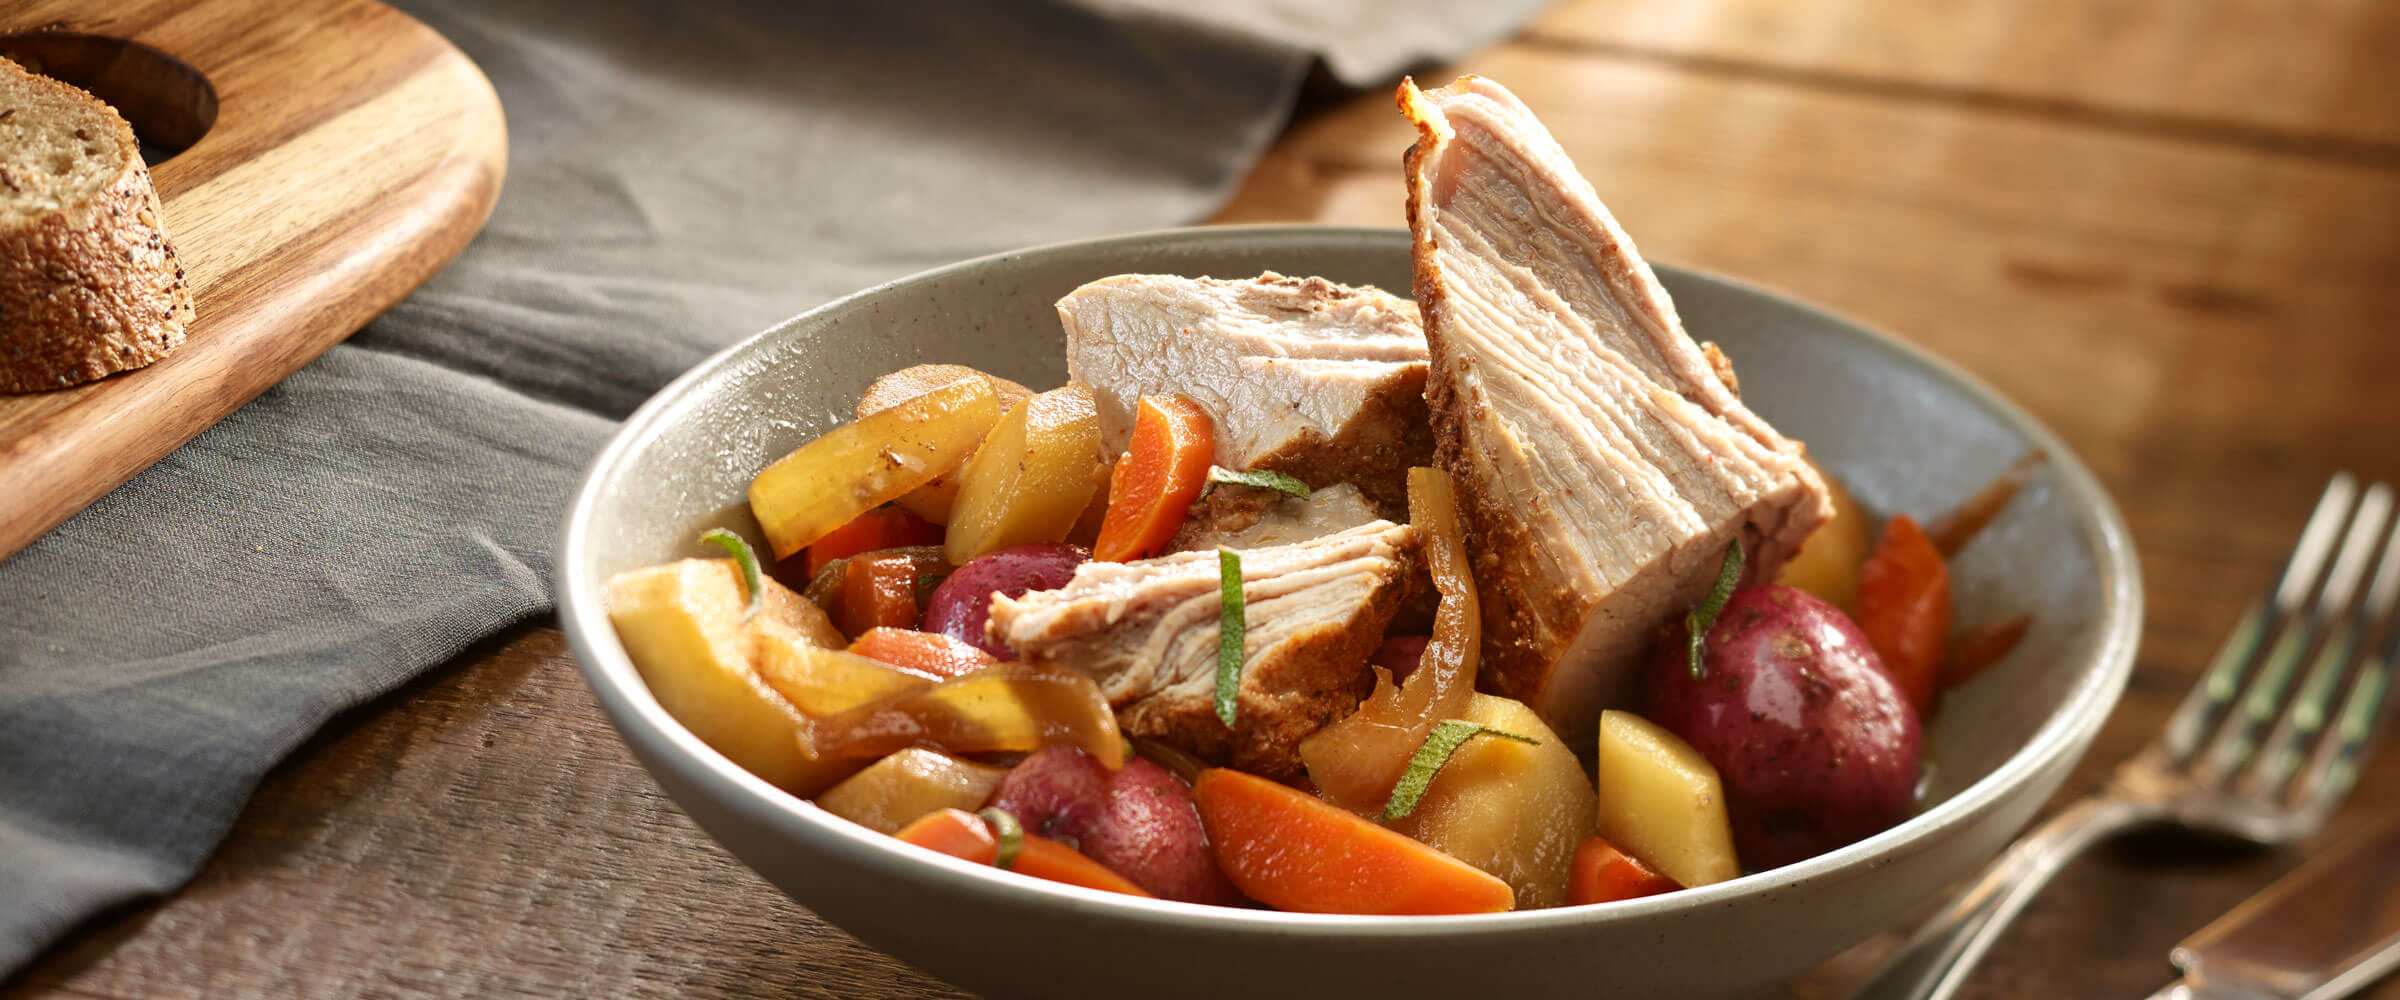 Slow-Cooked Pork & Veggies in gray Bowl with fork